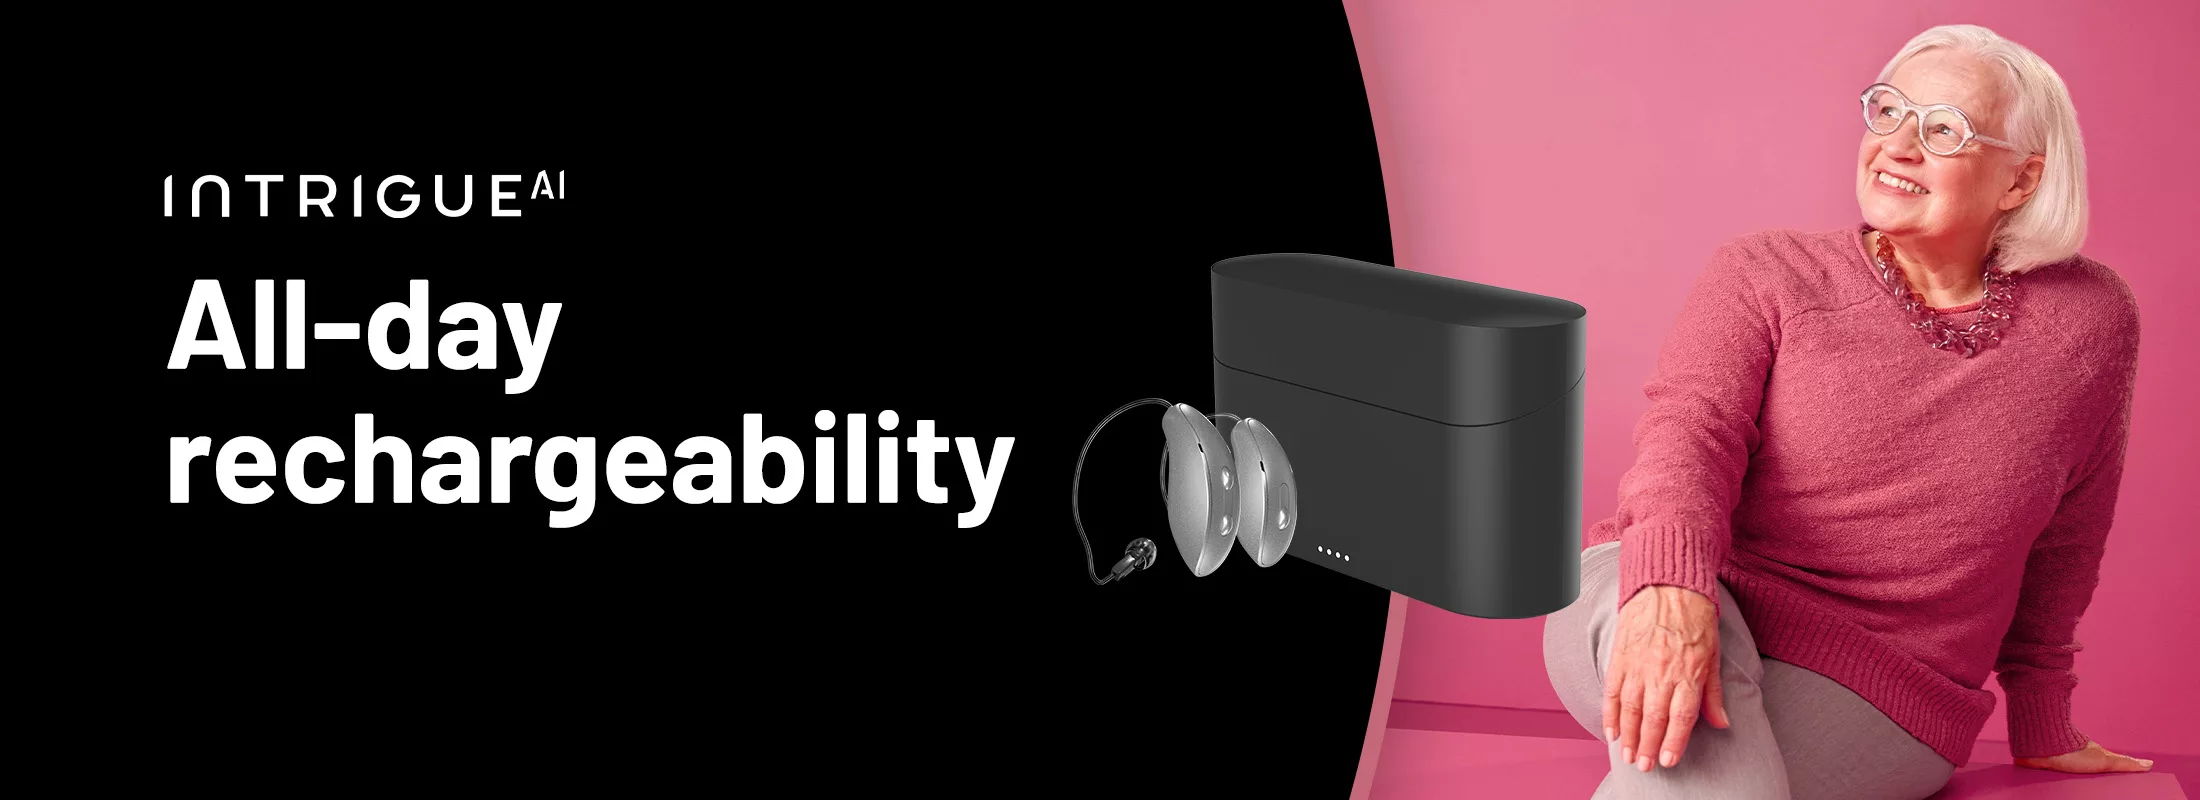 Photo of woman and rechargeable hearing aids with tagline: Intrigue AI - All-day recharcheability